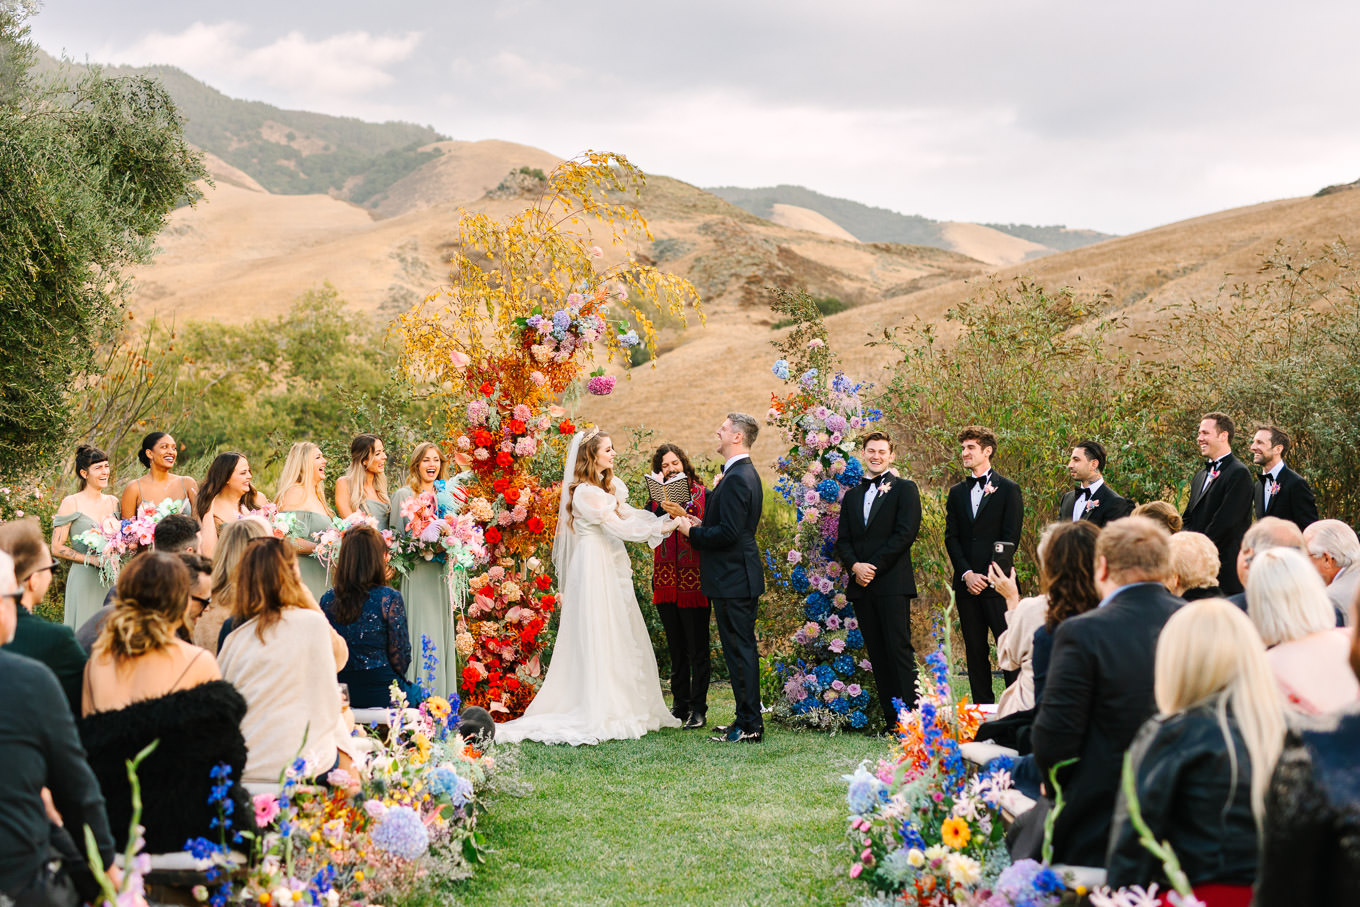 Allison Harvard & Jeremy Burke's floral-filled wedding ceremony | Colorful and quirky wedding at Higuera Ranch in San Luis Obispo | #sanluisobispowedding #californiawedding #higueraranch #madonnainn   Source: Mary Costa Photography | Los Angeles